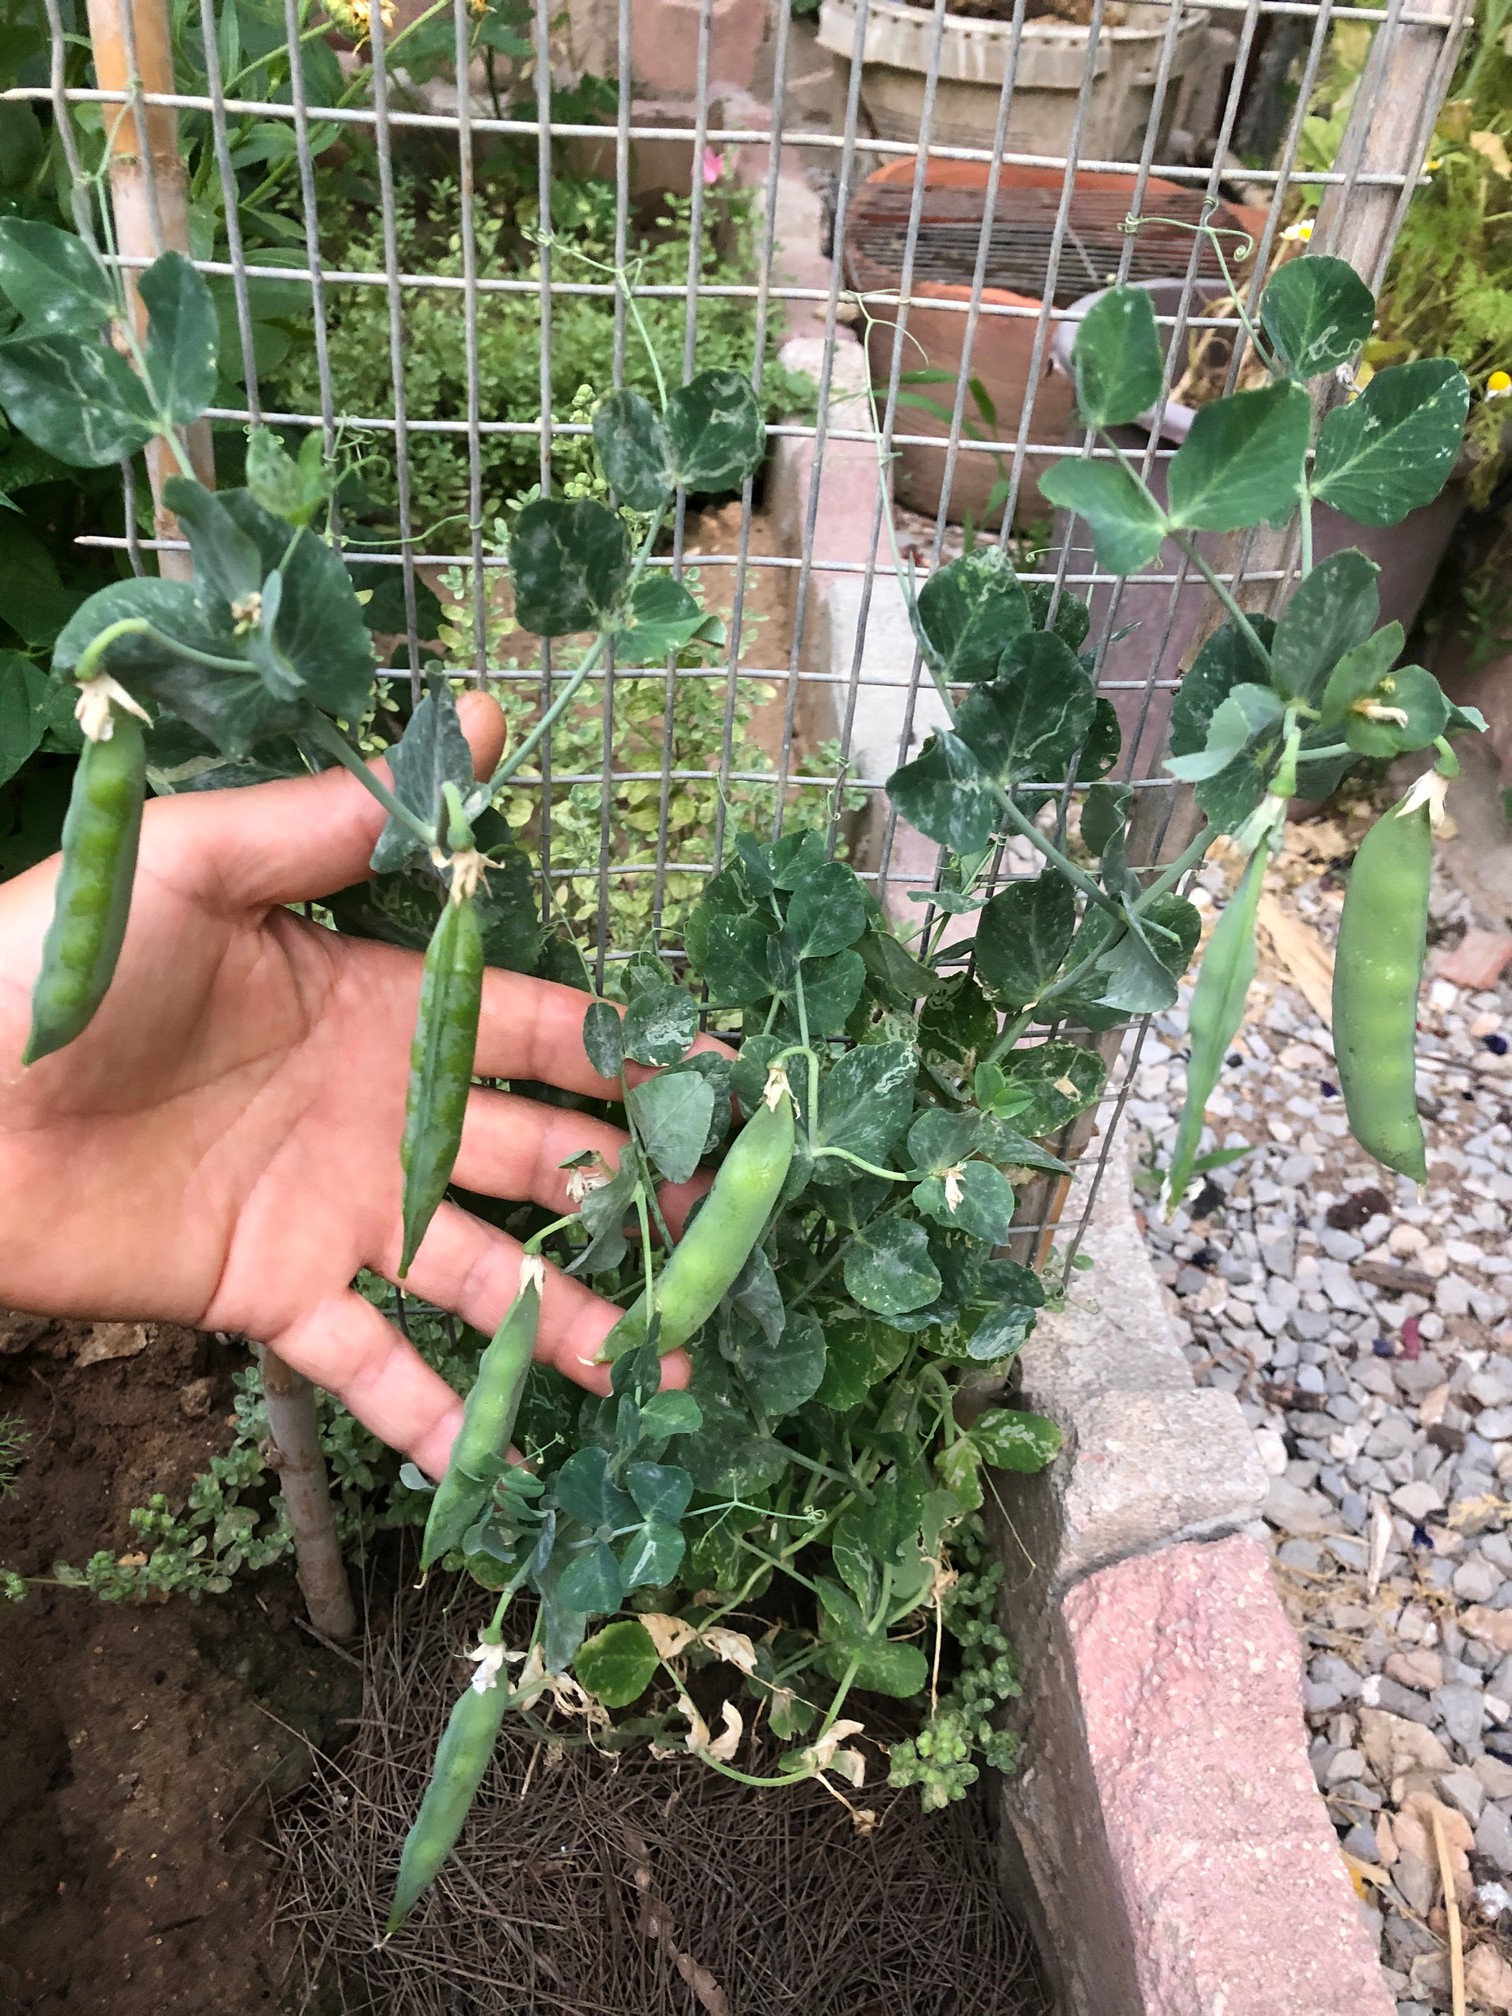 By using pre-sprouted seeds, gardeners can extend the growing season, enjoying fresh peas for a more prolonged period, particularly in regions with shorter growing seasons.